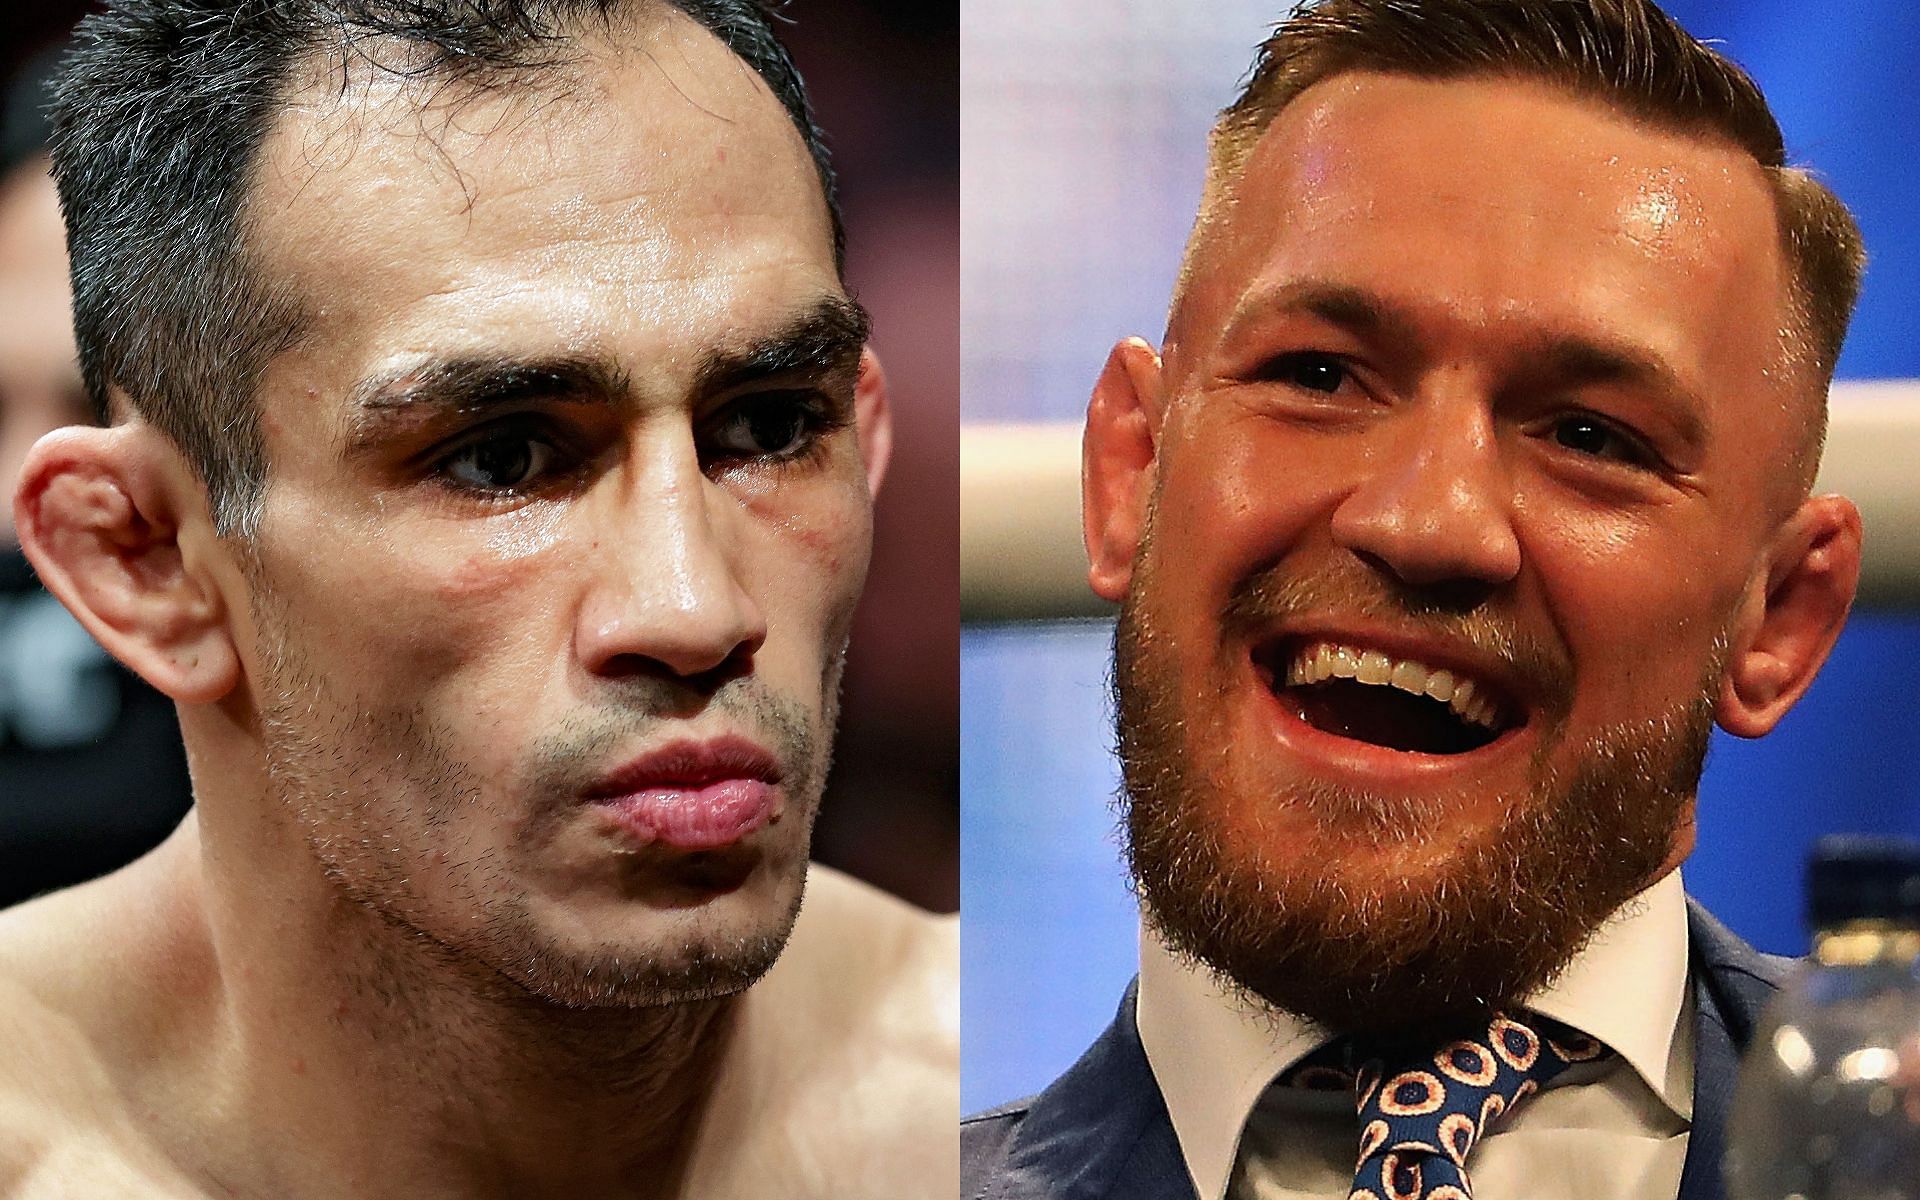 Tony Ferguson (left) and Conor McGregor (right) (Images via Getty)